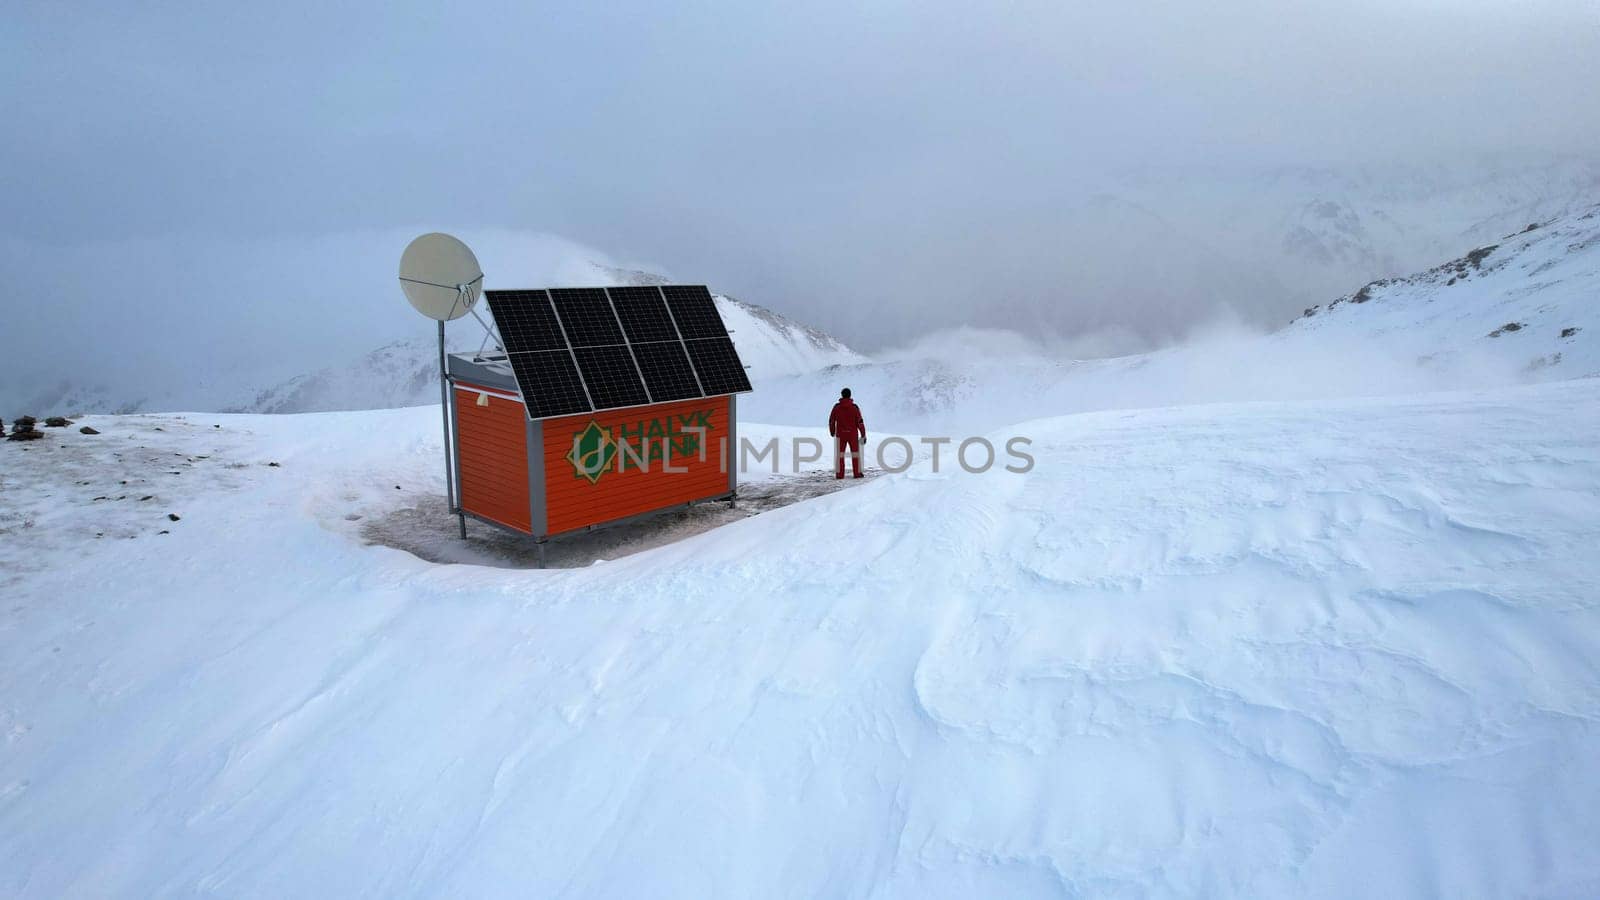 A rescue hut high in the mountains among the clouds. There is a climber standing next to the house. White clouds enveloped the snowy mountains. Yellow dawn and clouds. Snowy hills. 01.05.2023 Almaty